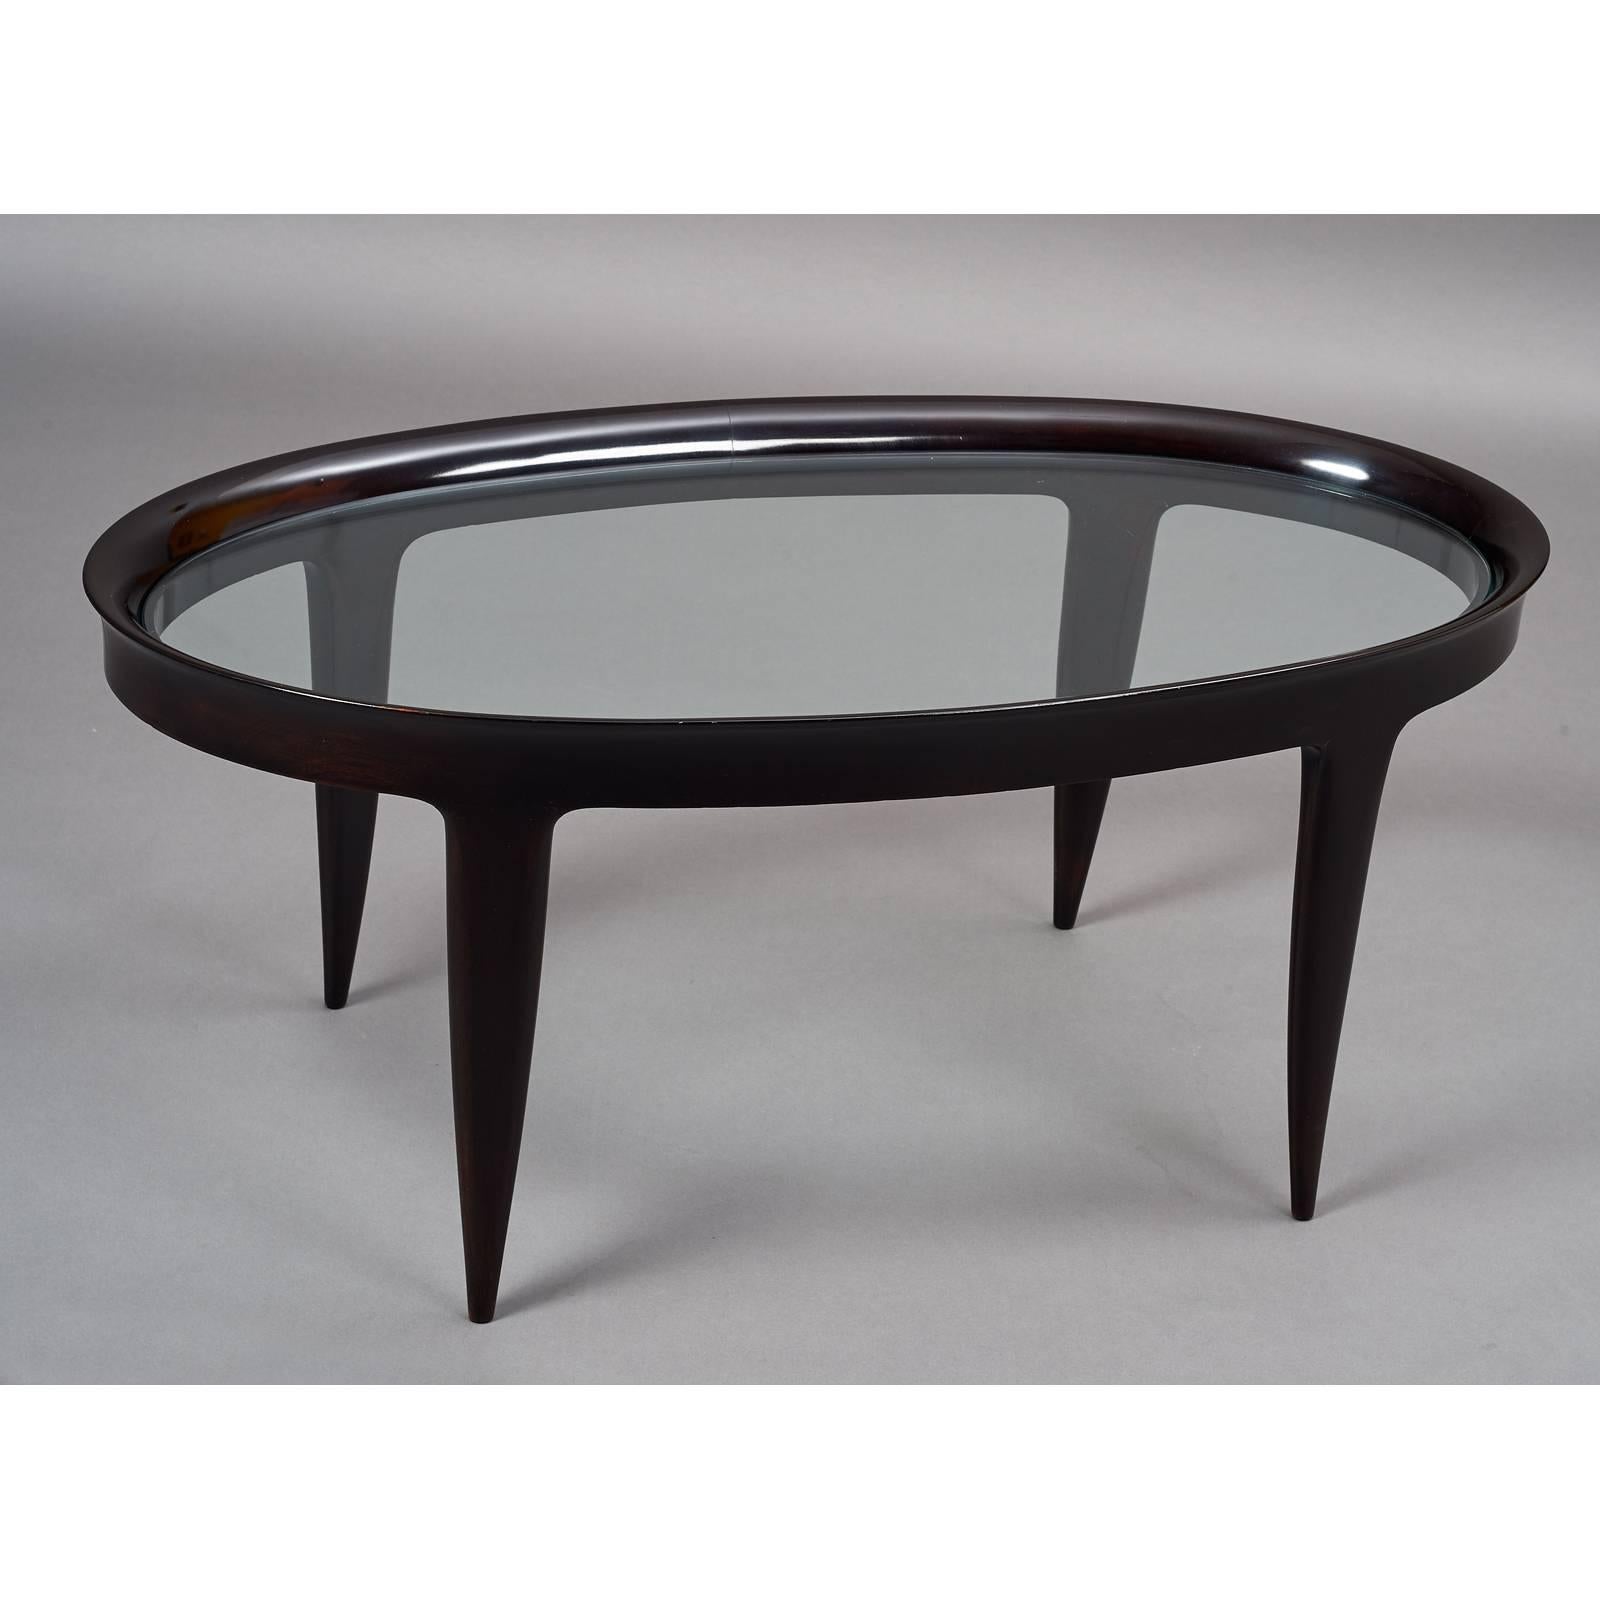 Italian Elegant Oval Table in the Style of Gio Ponti, 1950s